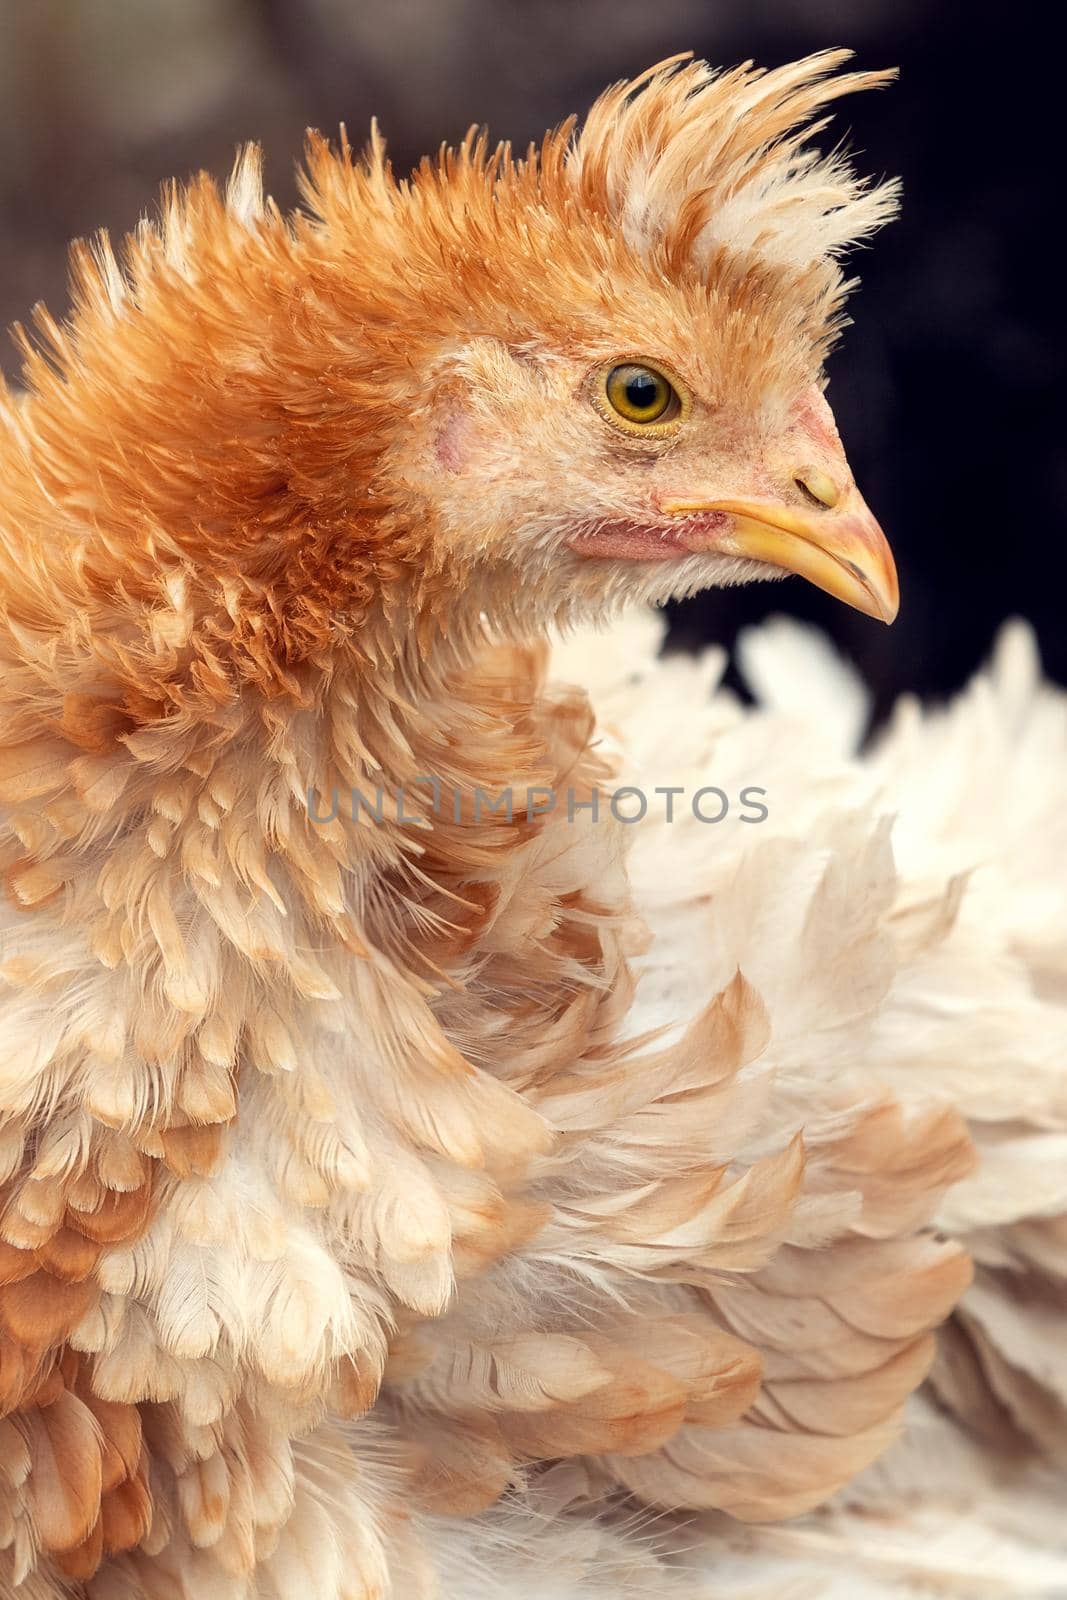 A vertical portrait of an interesting and very beautiful golden-colored tufted chicken in a dark background.